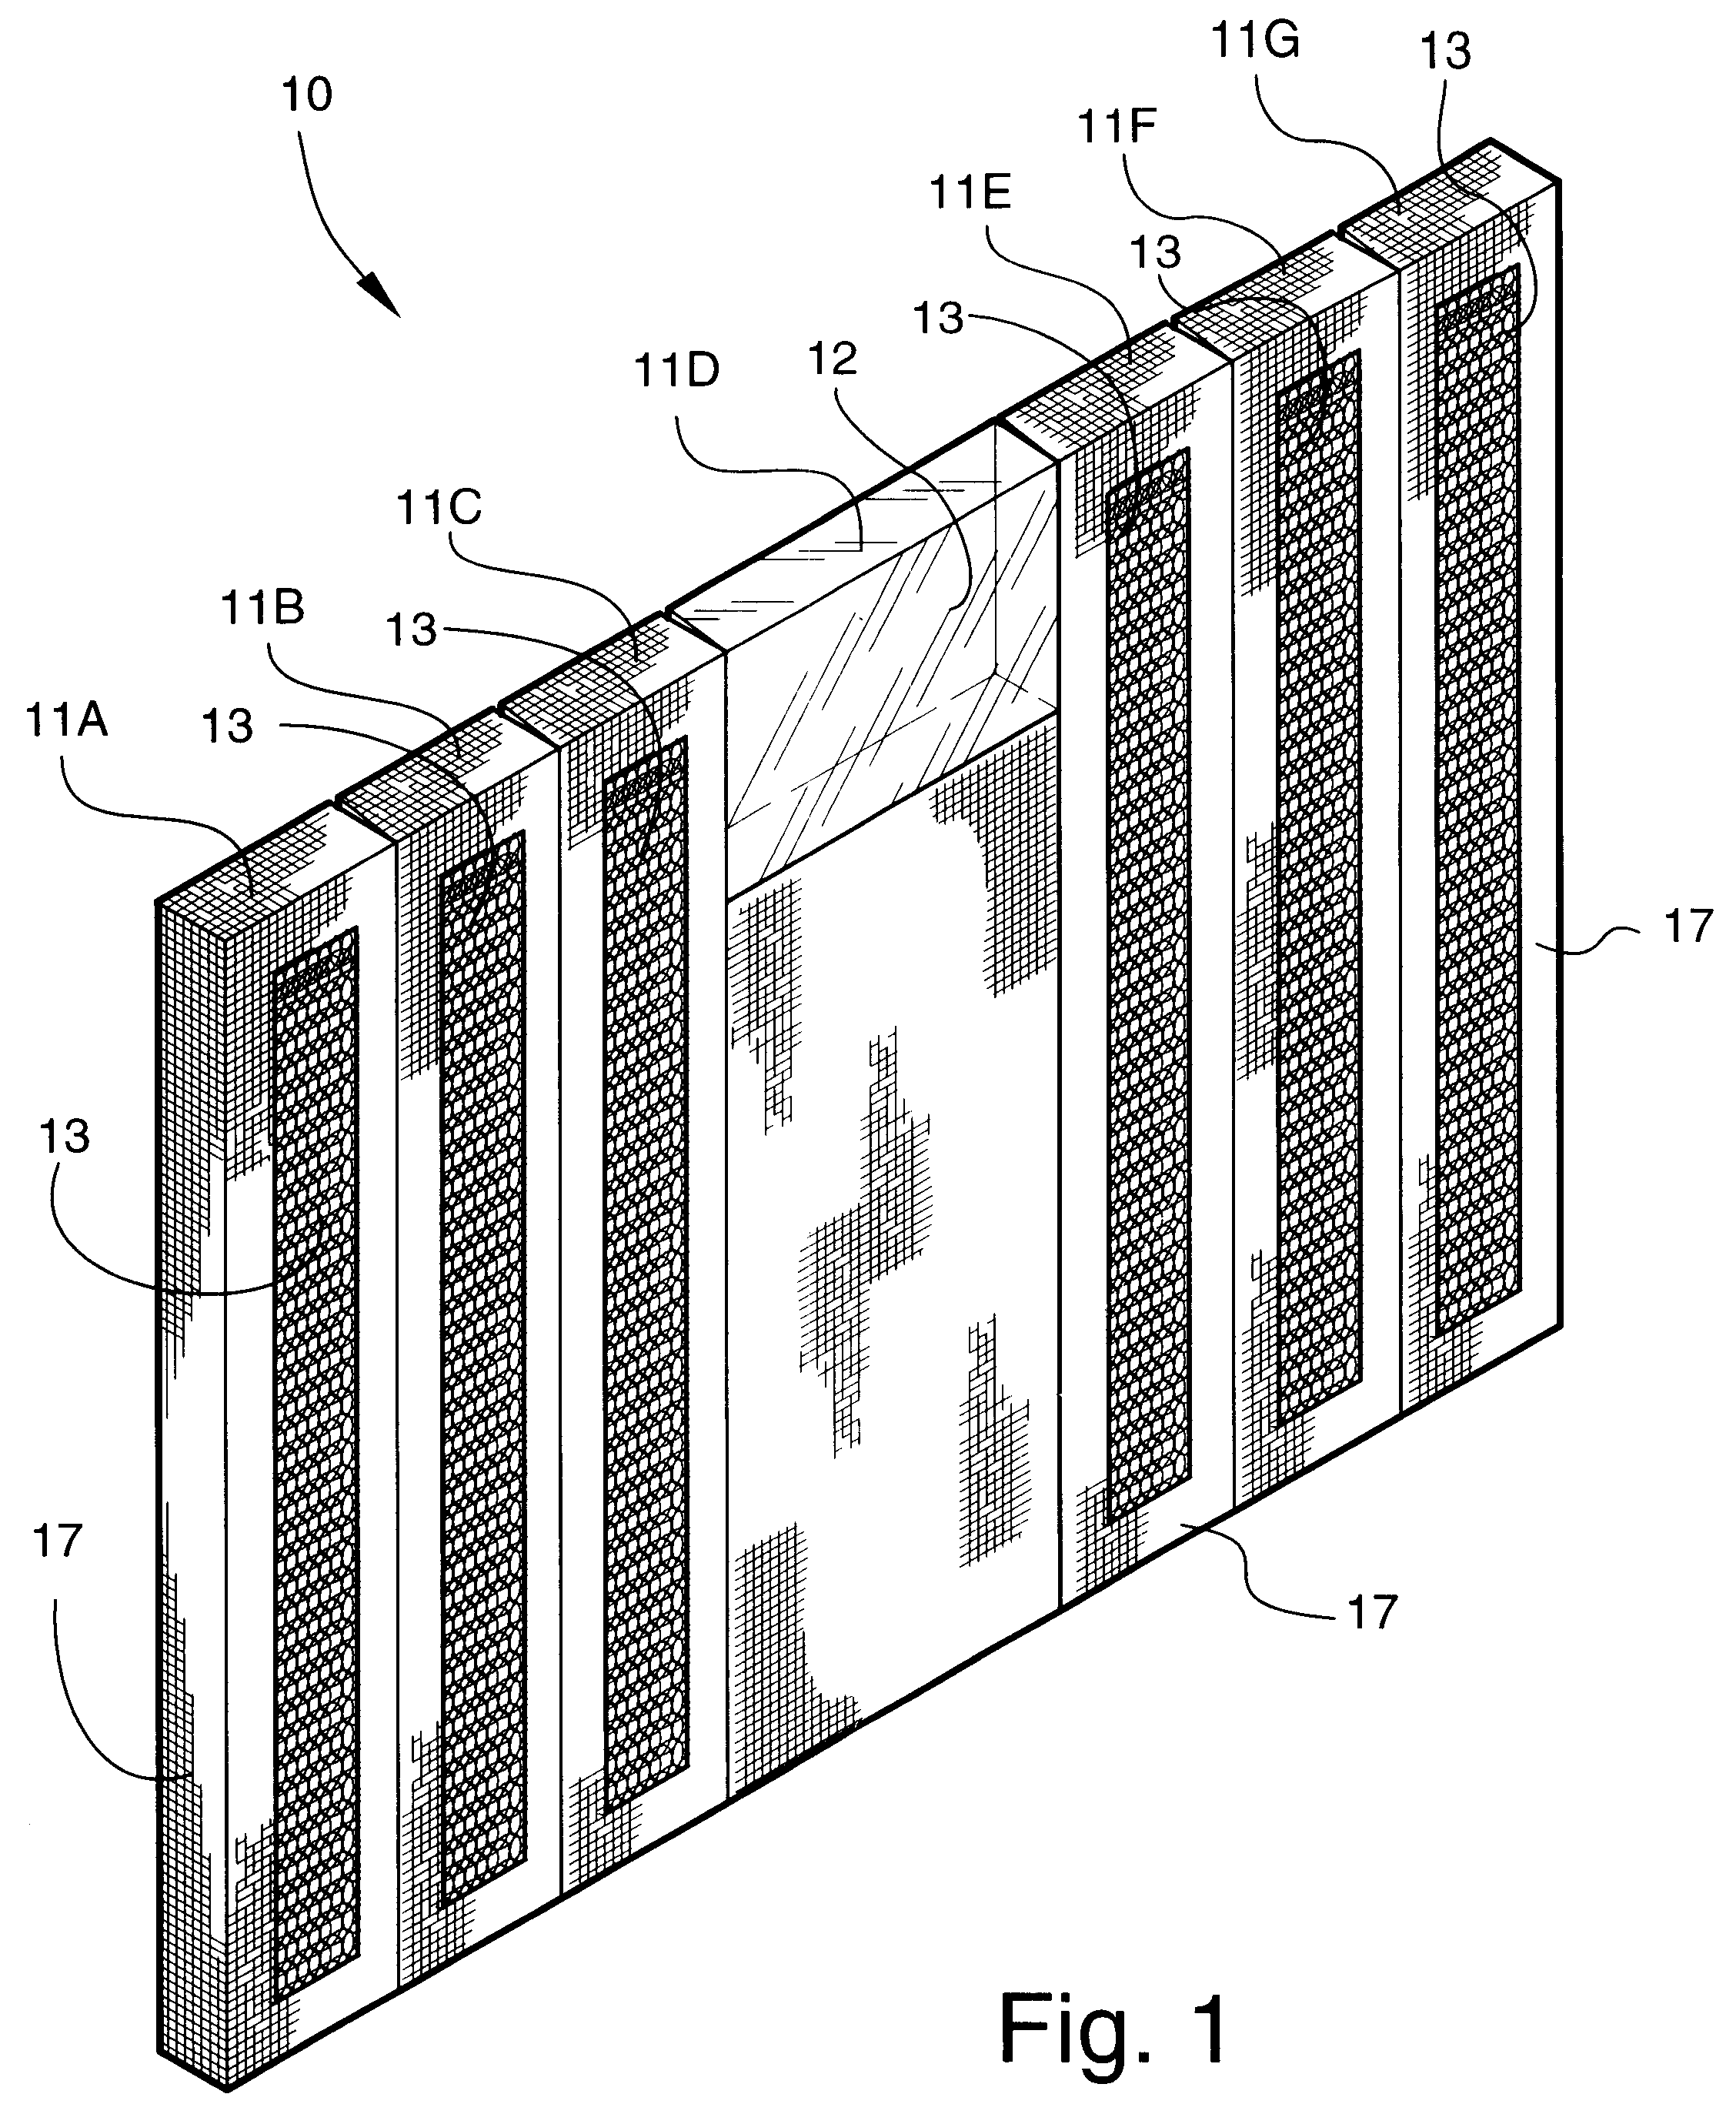 Physical restraining pad assembly and system